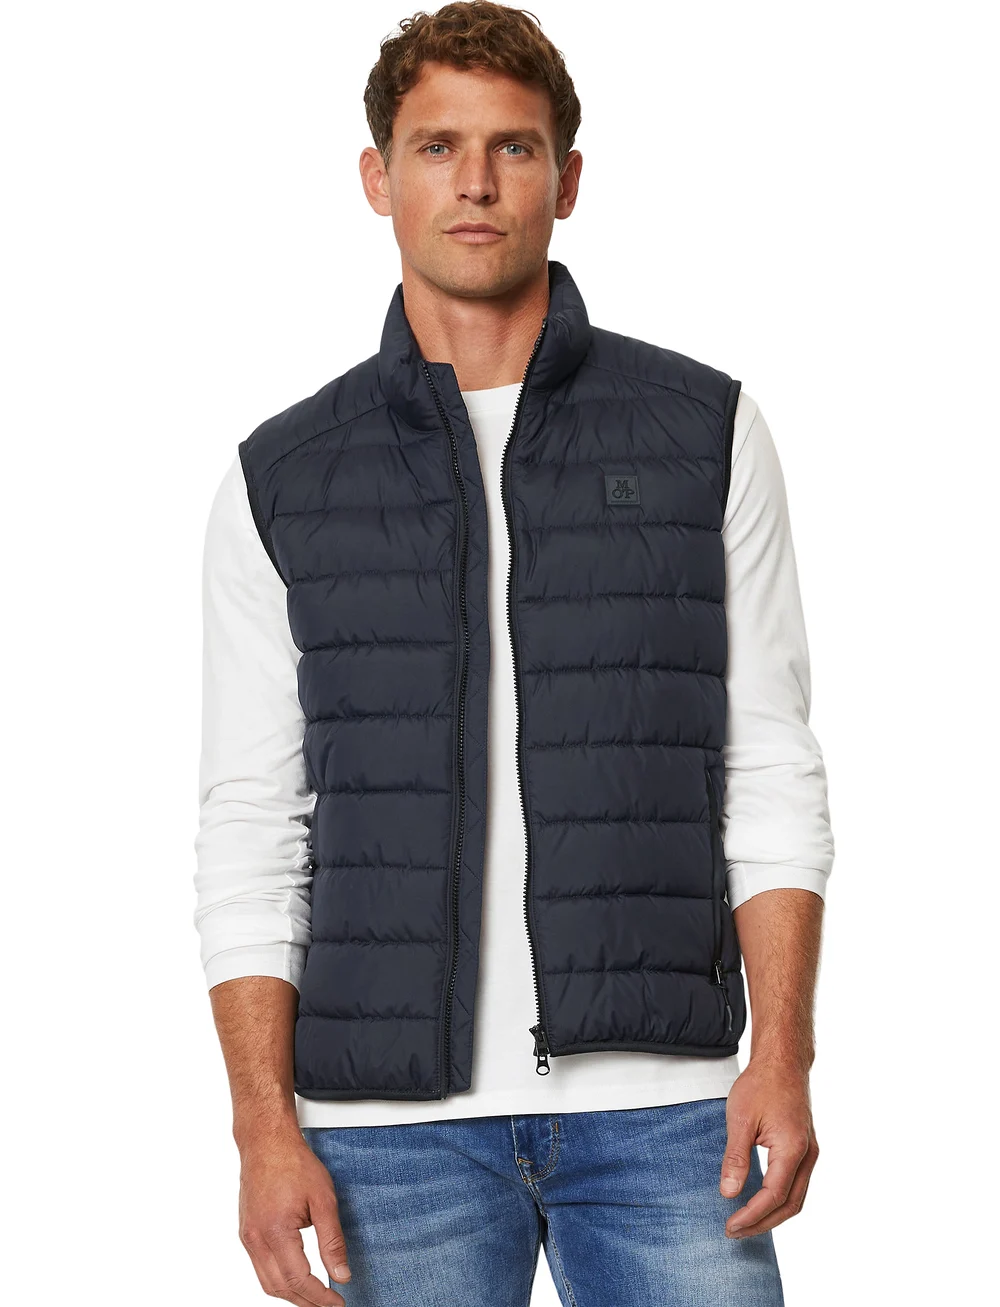 Marc O\'Polo Woven Outdoor Vests - 159.95 €. Buy Vests from Marc O\'Polo  online at Boozt.com. Fast delivery and easy returns